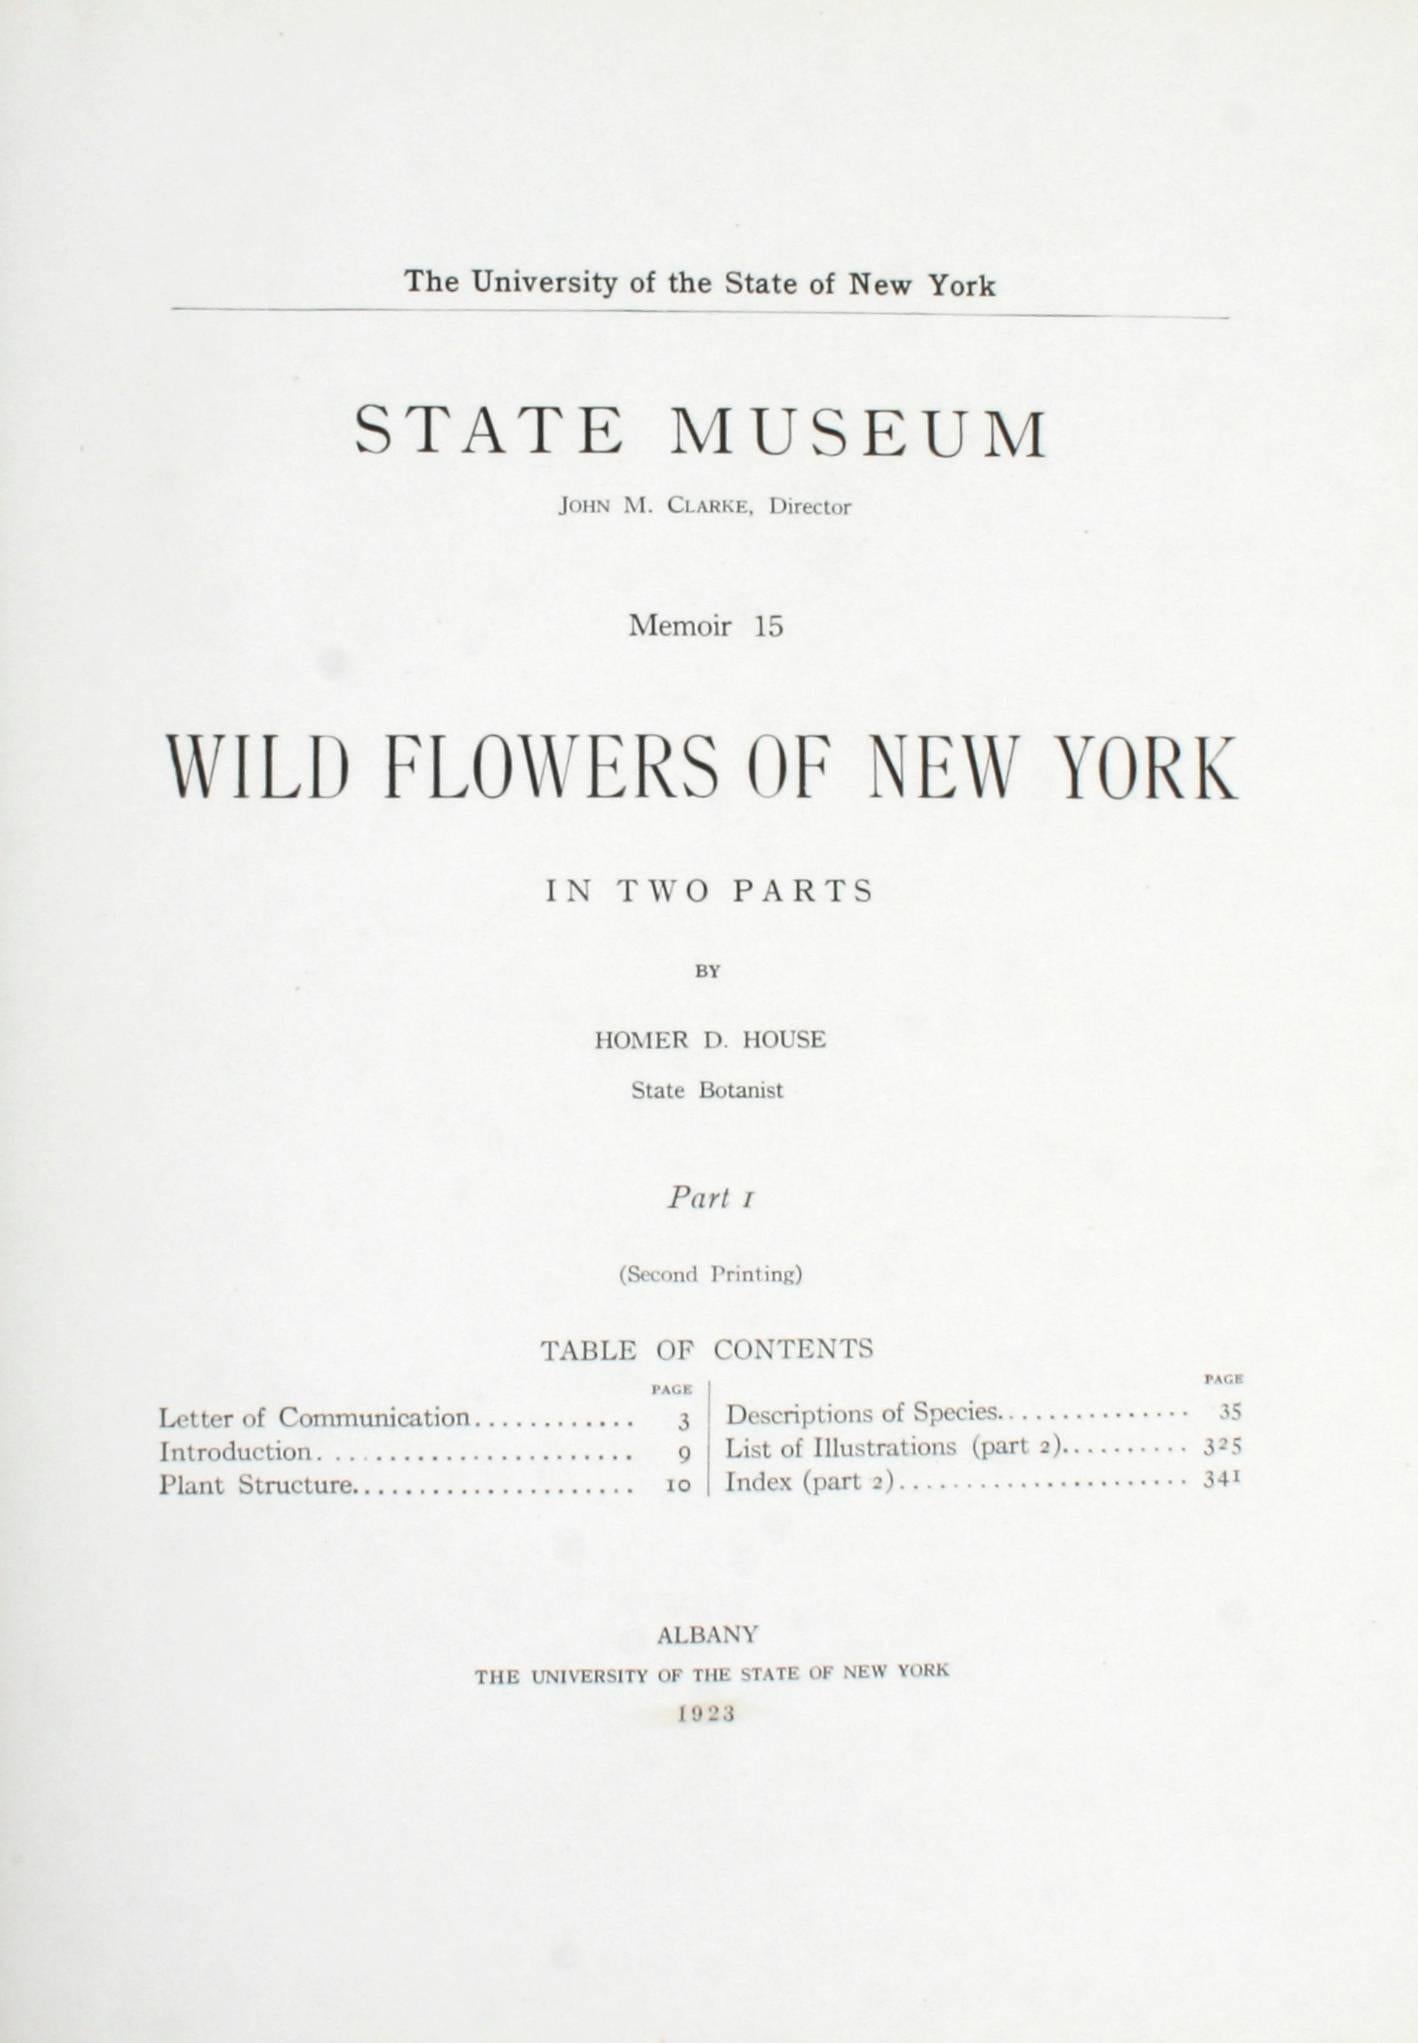 Wild Flowers of New York, Vol. I and II. Albany: The University of The State of New York, 1923. Second printing hardcovers with no dust jacket as issued. 362 pages of text and 264 color plates. A pair of beautiful books by Homer D. House (State